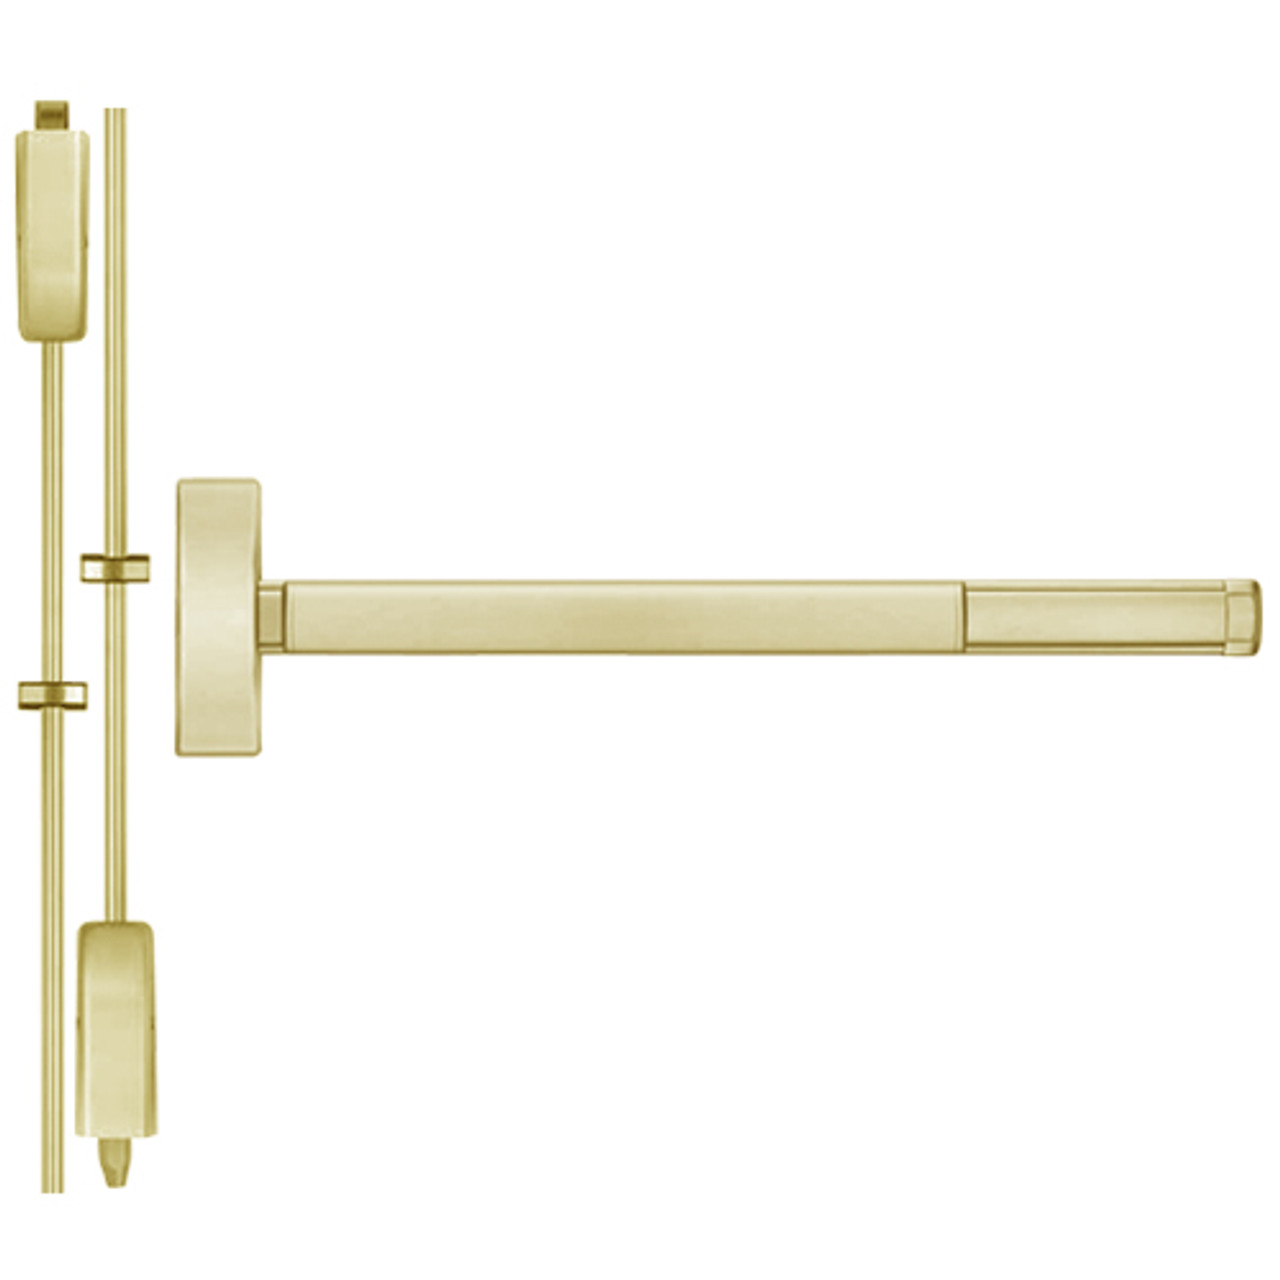 2208-606-48 PHI 2200 Series Non Fire Rated Apex Surface Vertical Rod Exit Device Prepped for Key Controls Lever/Knob in Satin Brass Finish